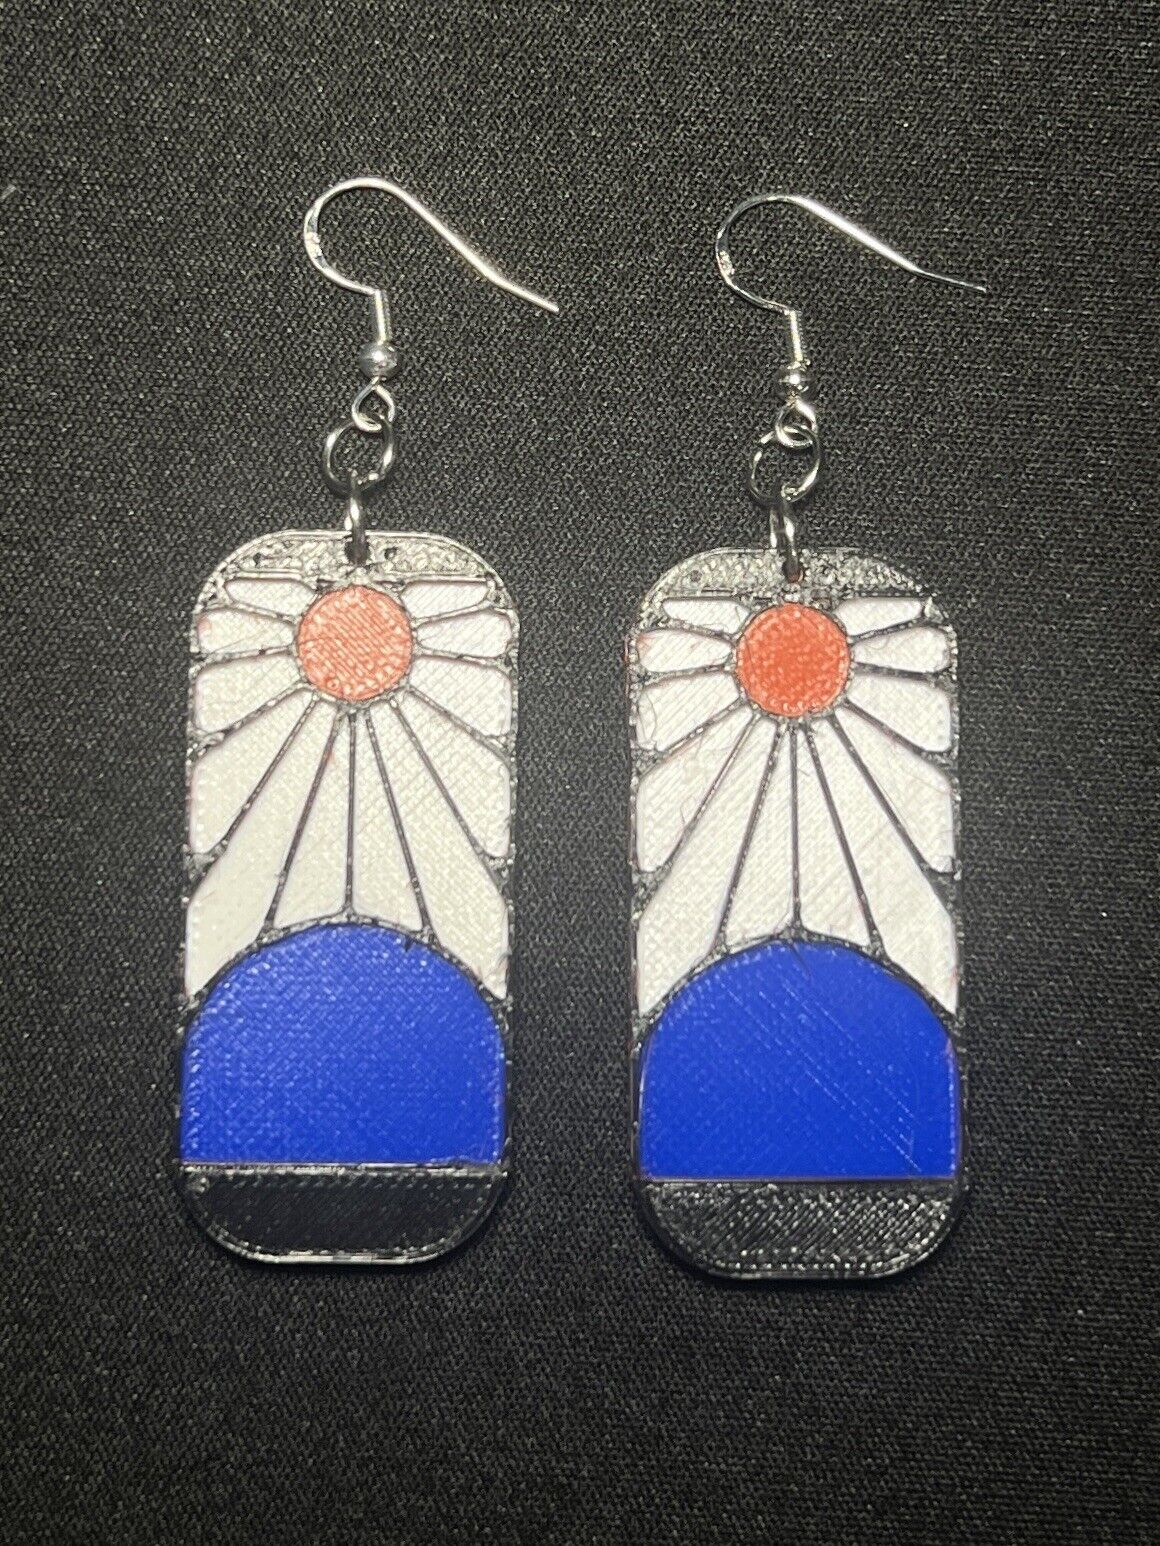 Homemade hanafuda earrings. Not perfect, but I'm not unhappy for a first  attempt. : r/DemonSlayerAnime